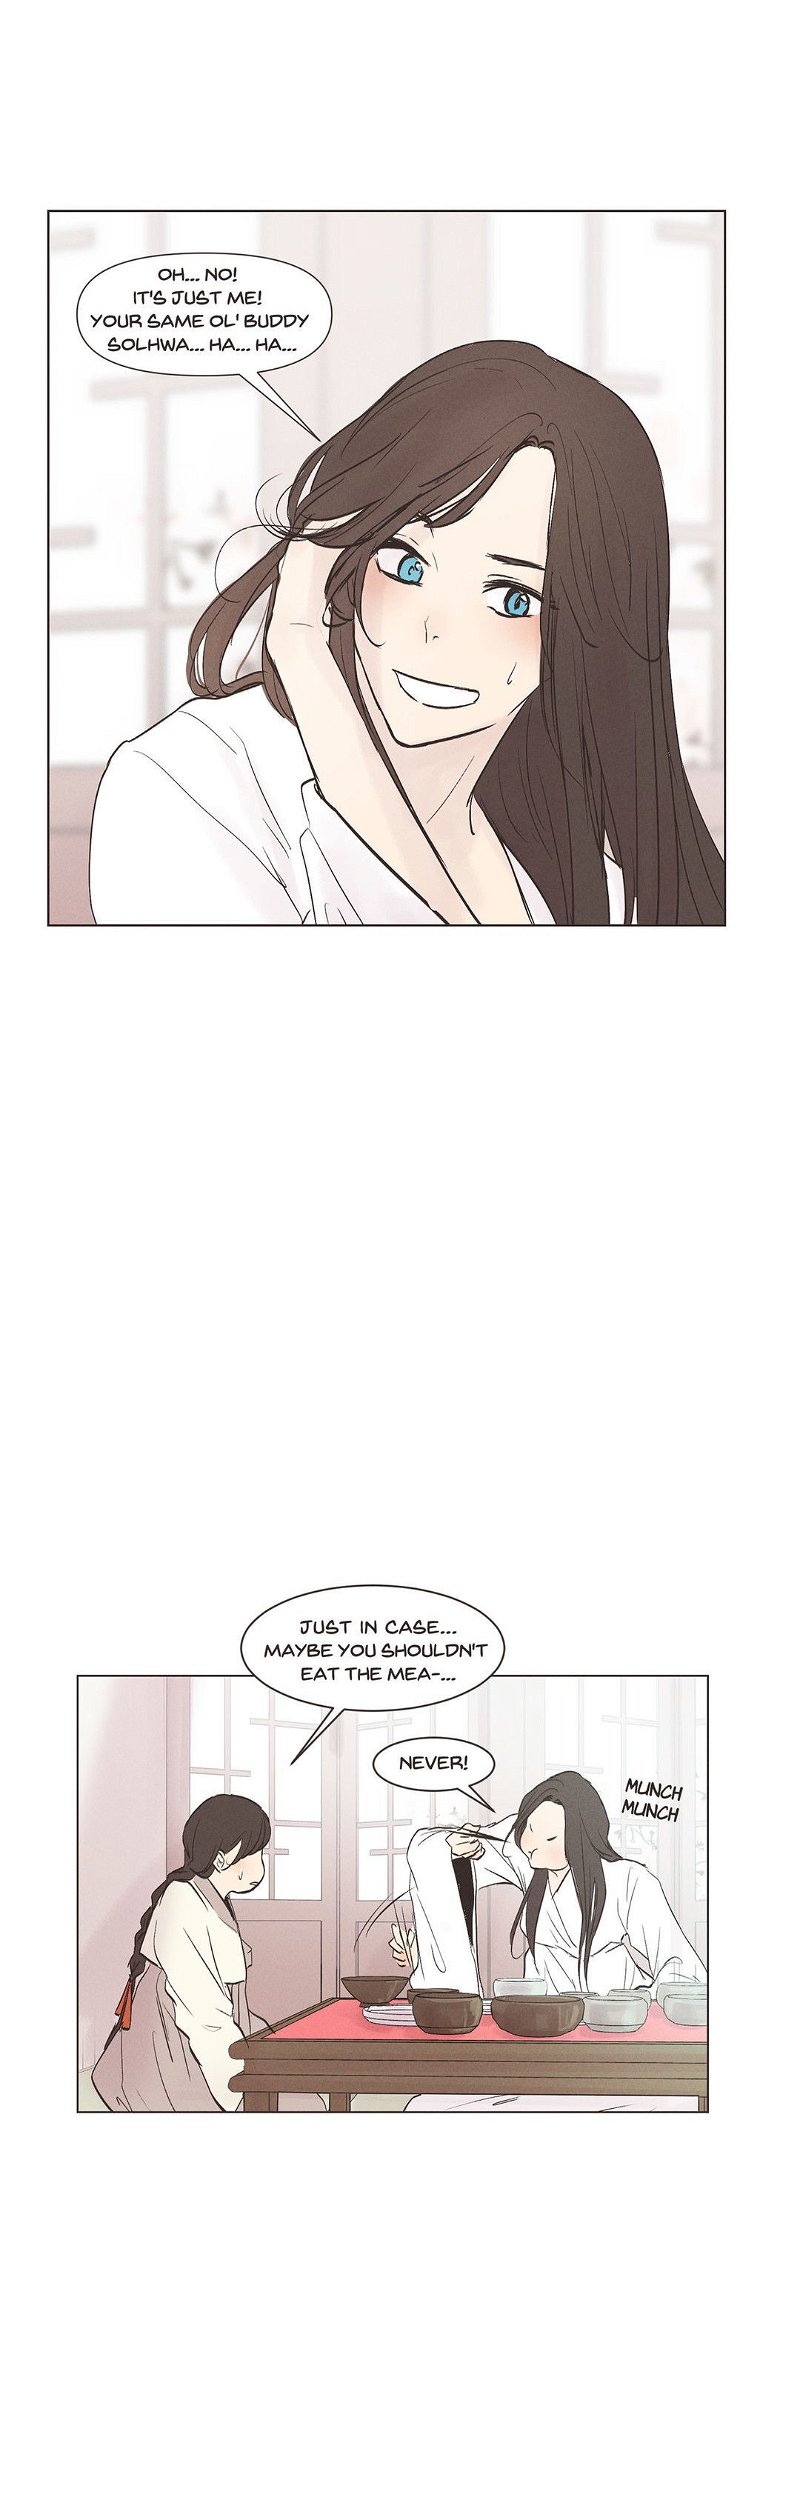 Ellin’s Solhwa Chapter 3 - Page 14